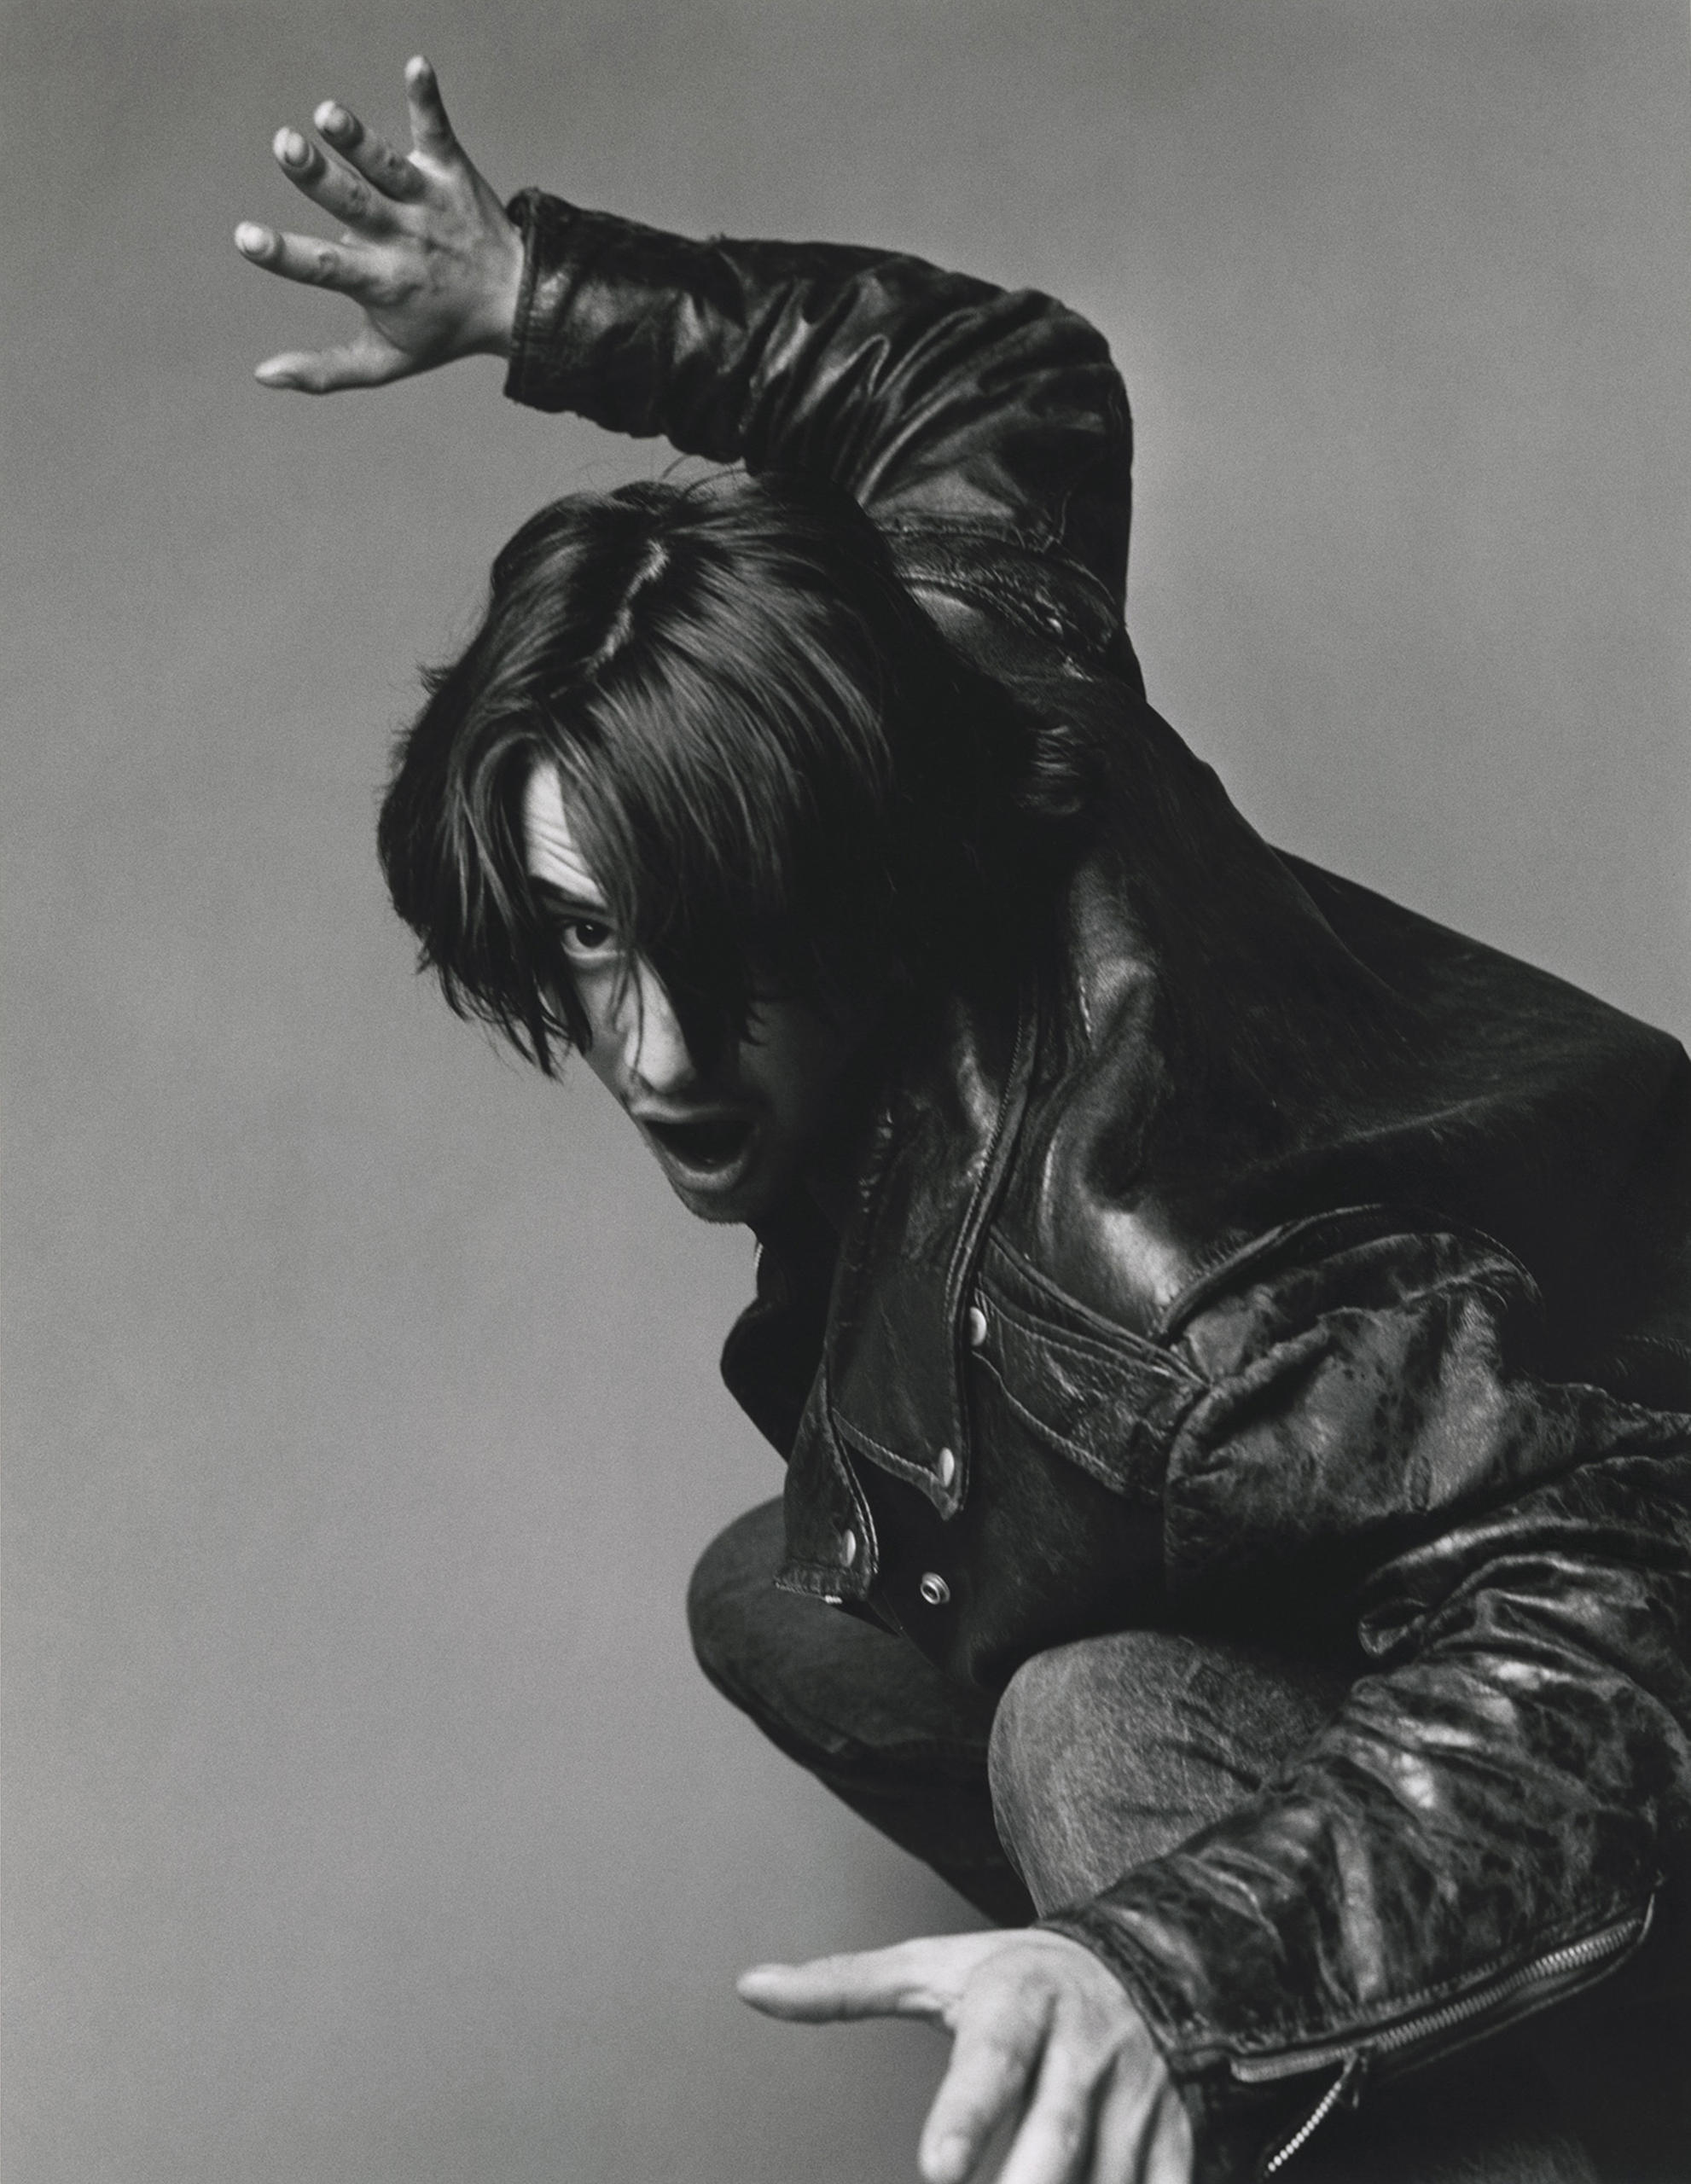 Portrait of a Keanu Reeves wearing leather jacket